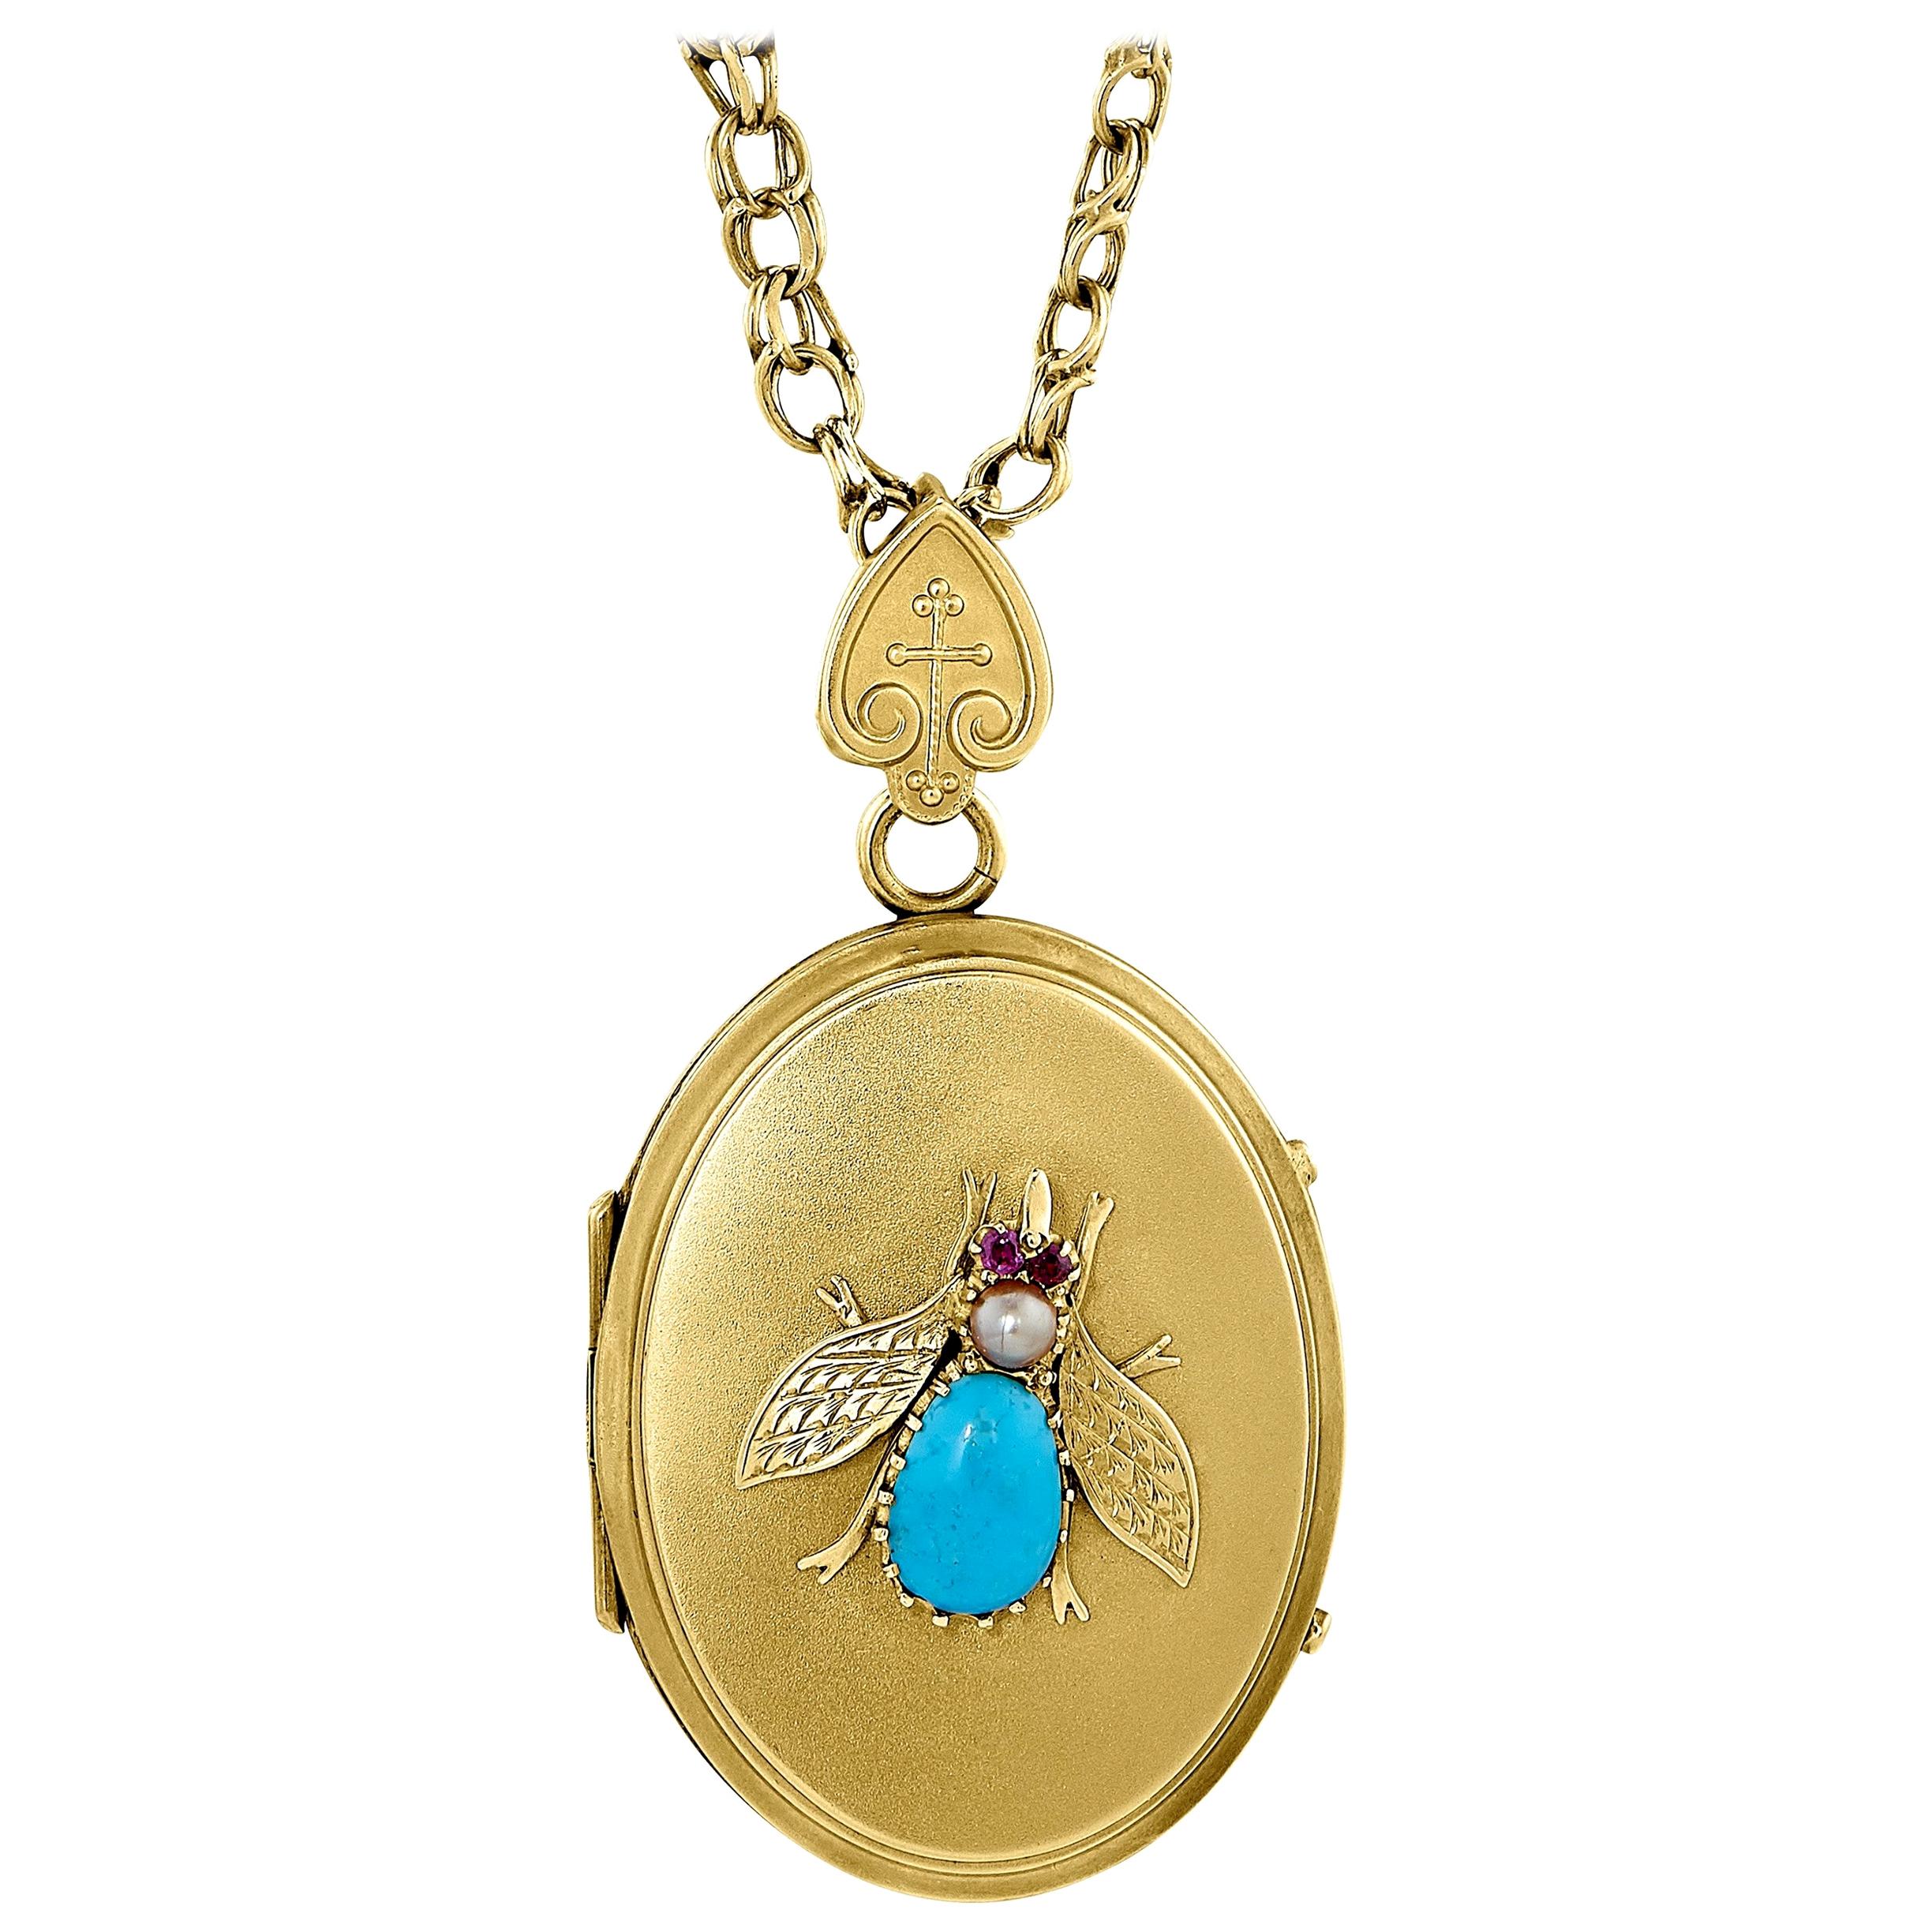 Antique Oval Locket Bee Design Comprised of Turquoise, Ruby and Pearl in 14kt For Sale